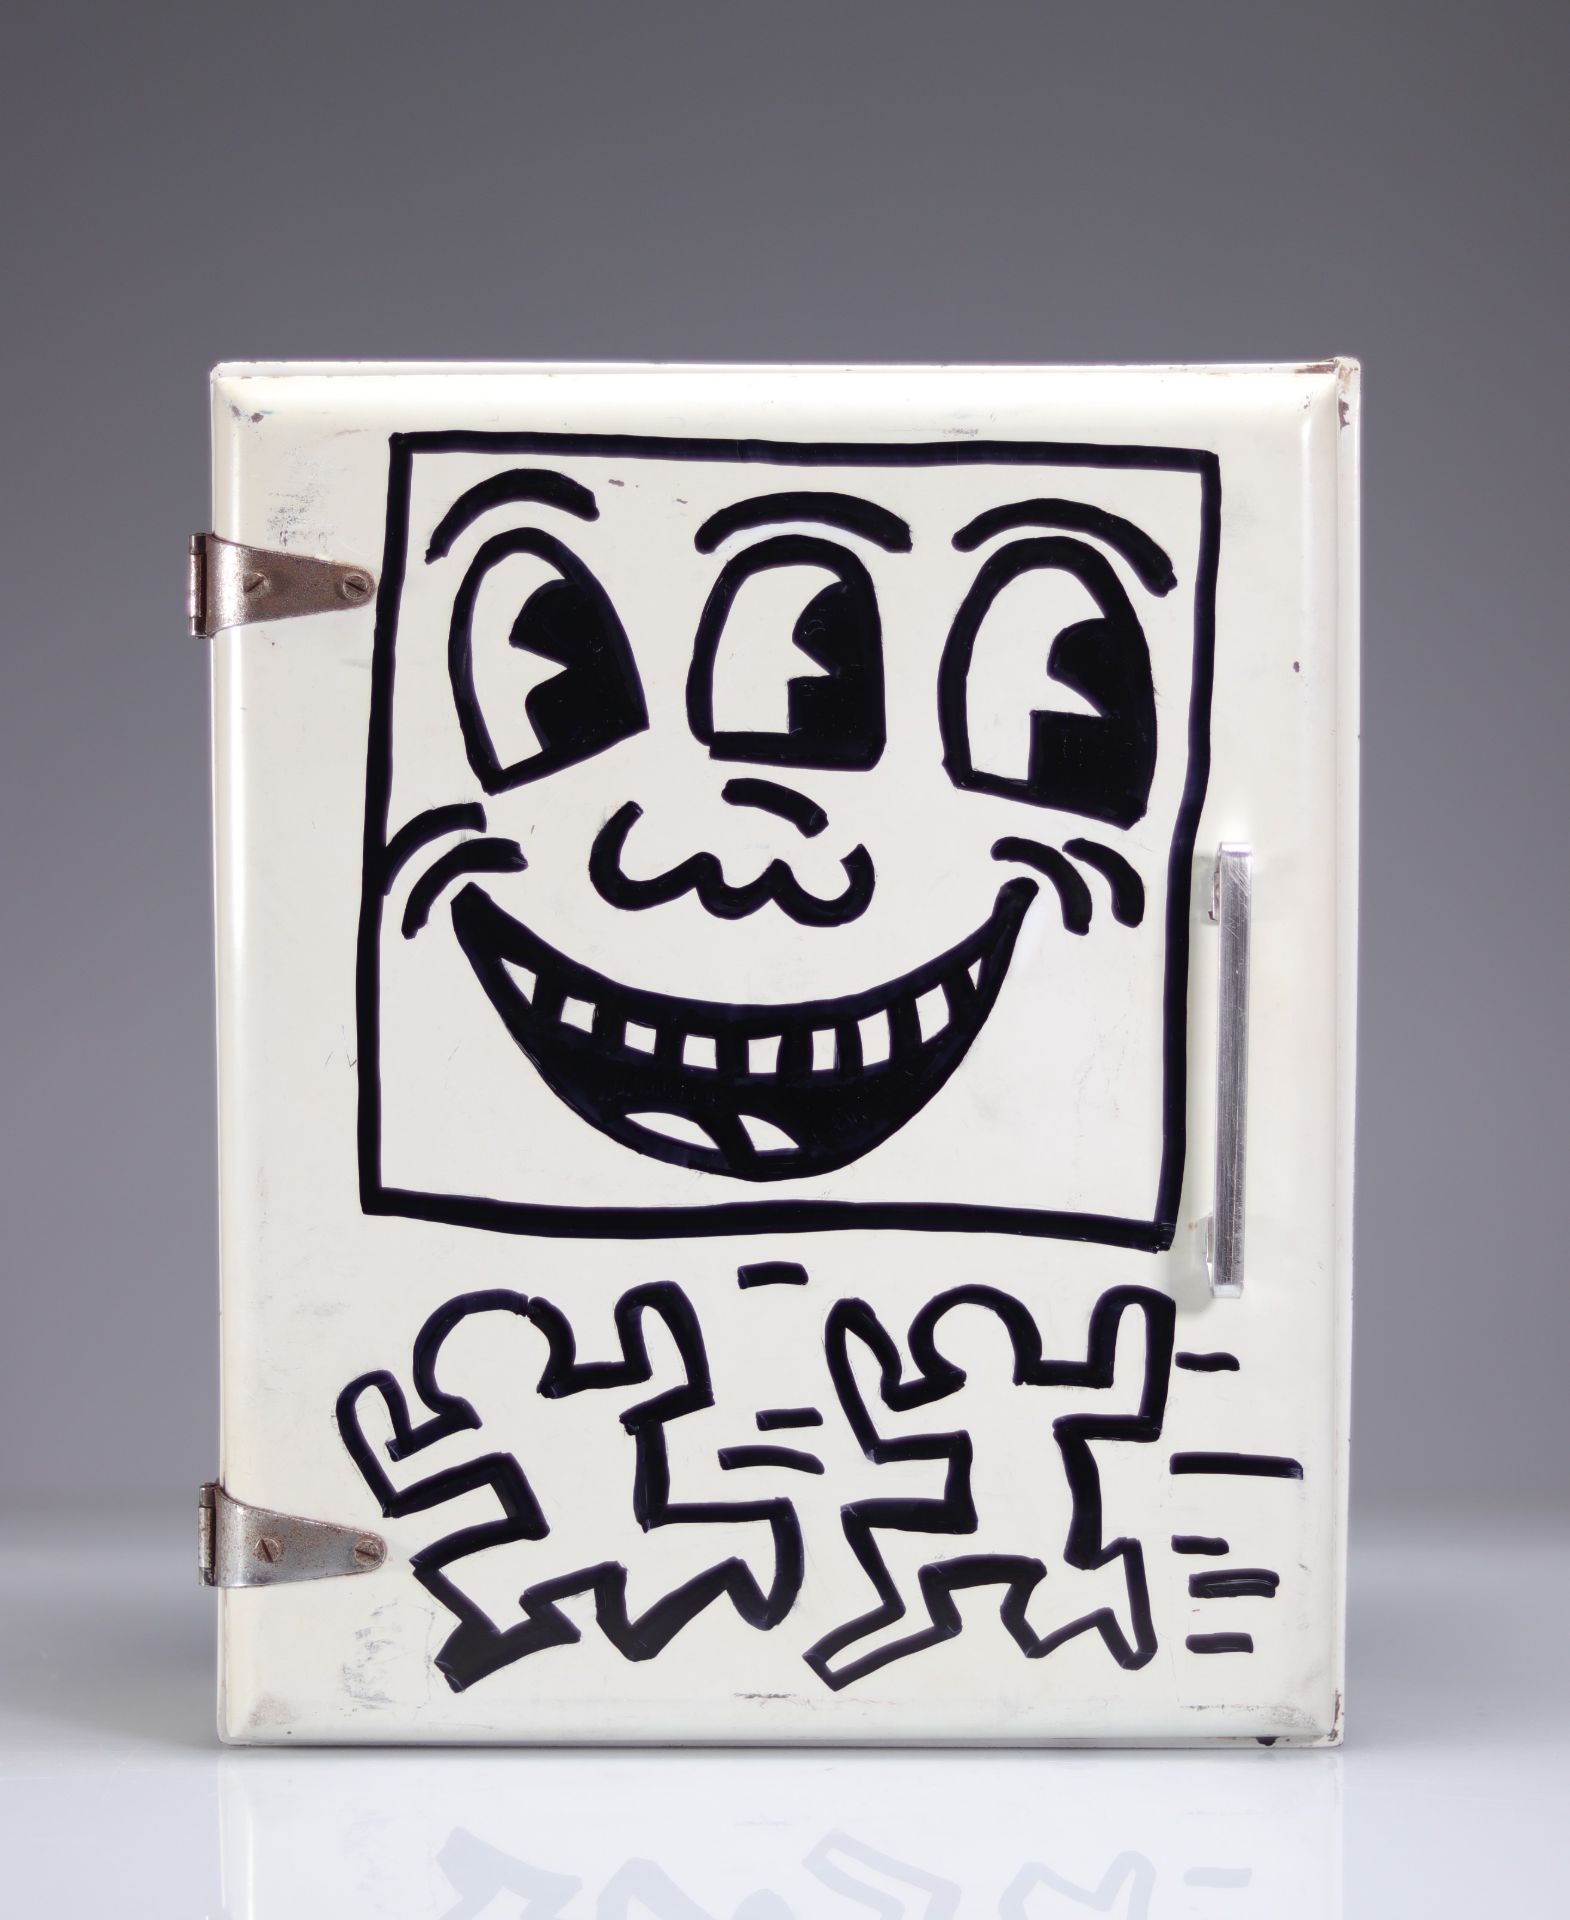 Keith Haring. Medicine cabinet. Pen drawing on the wardrobe door. Signed "K.Haring" inside. Dated 82